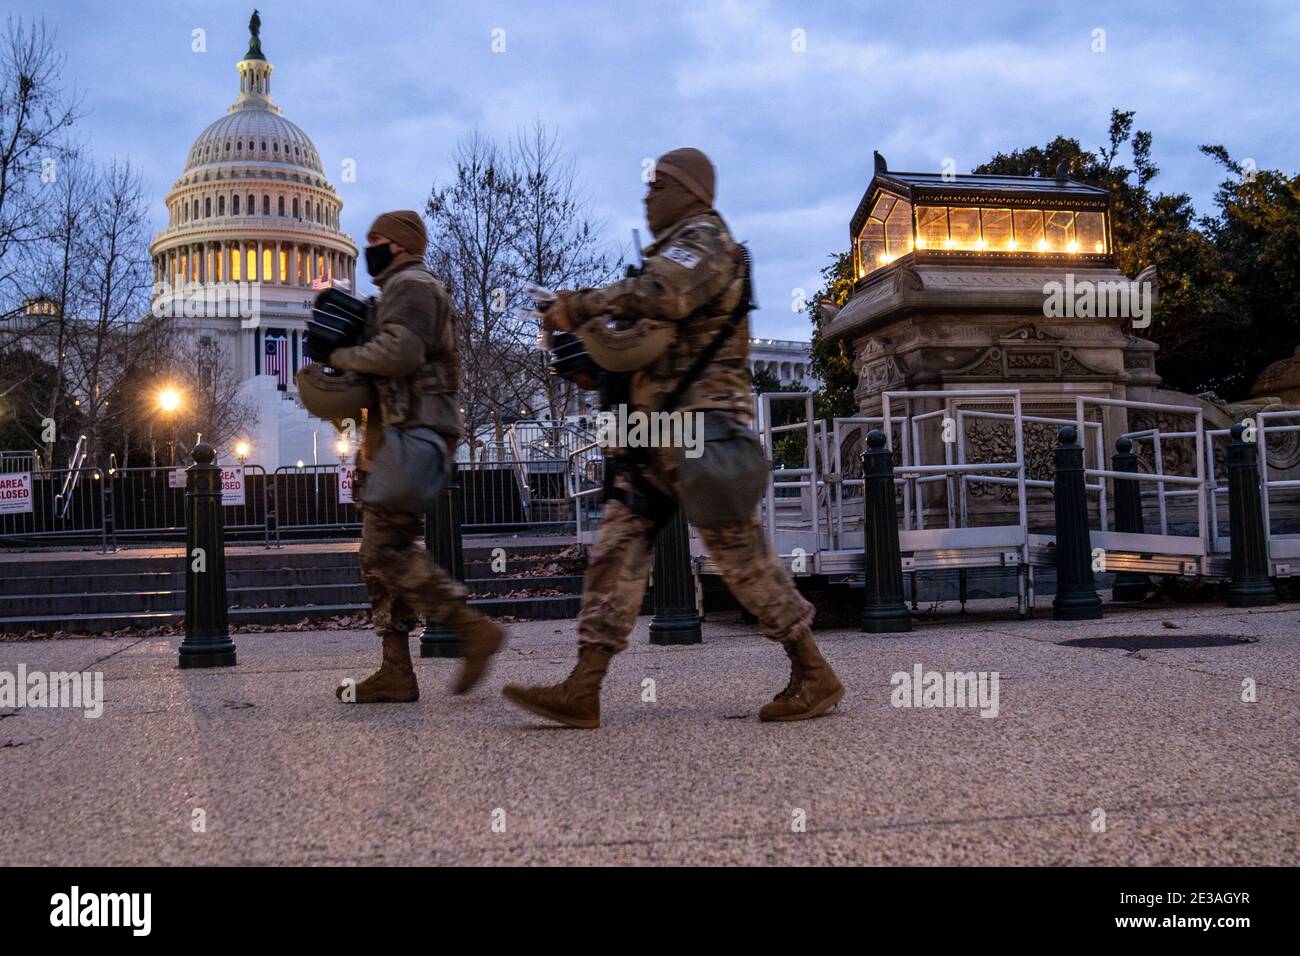 Washington, United States. 17th Jan, 2021. National Guard troops secure the Nation's Capital ahead of the upcoming inauguration for President Joe Biden at the U.S. Capitol in Washington, DC on Sunday, January 17, 2021. Security is extra tight since Jan 6, when pro-Trump MAGA mobs breached the security perimeter and penetrated the U.S. Capitol. Photo by Ken Cedeno/UPI. Credit: UPI/Alamy Live News Stock Photo